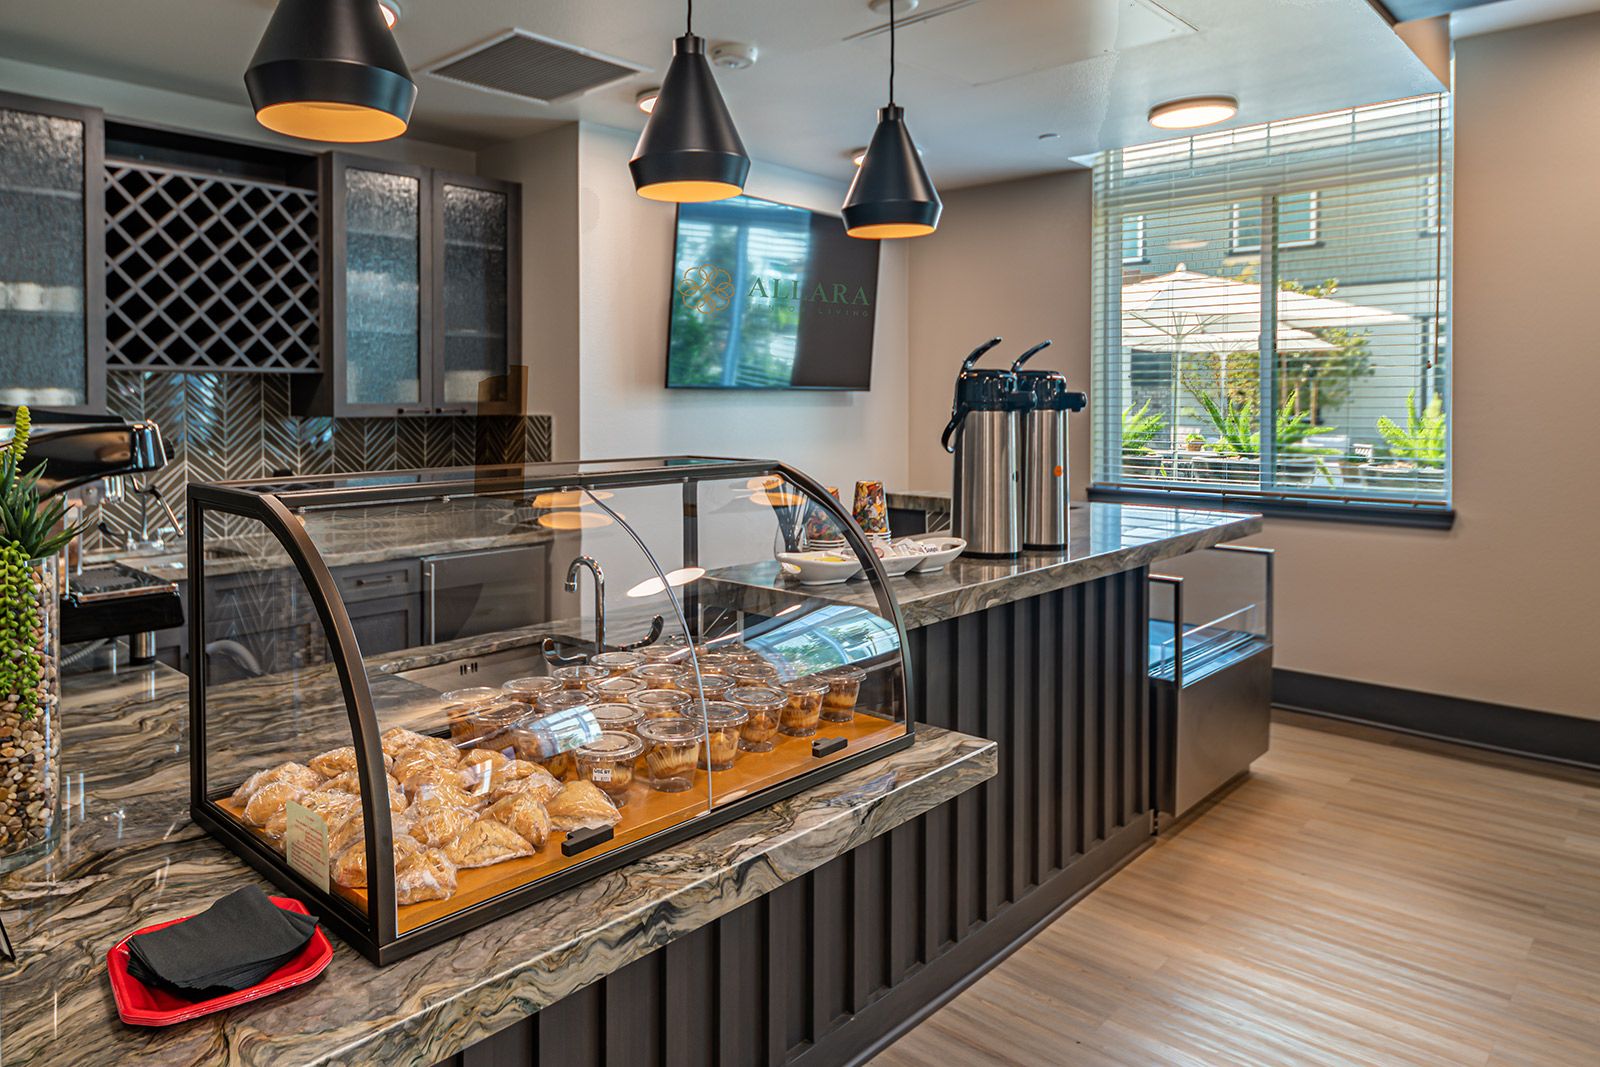 Interior view of Allara Senior Living community featuring a bakery shop with modern architecture.